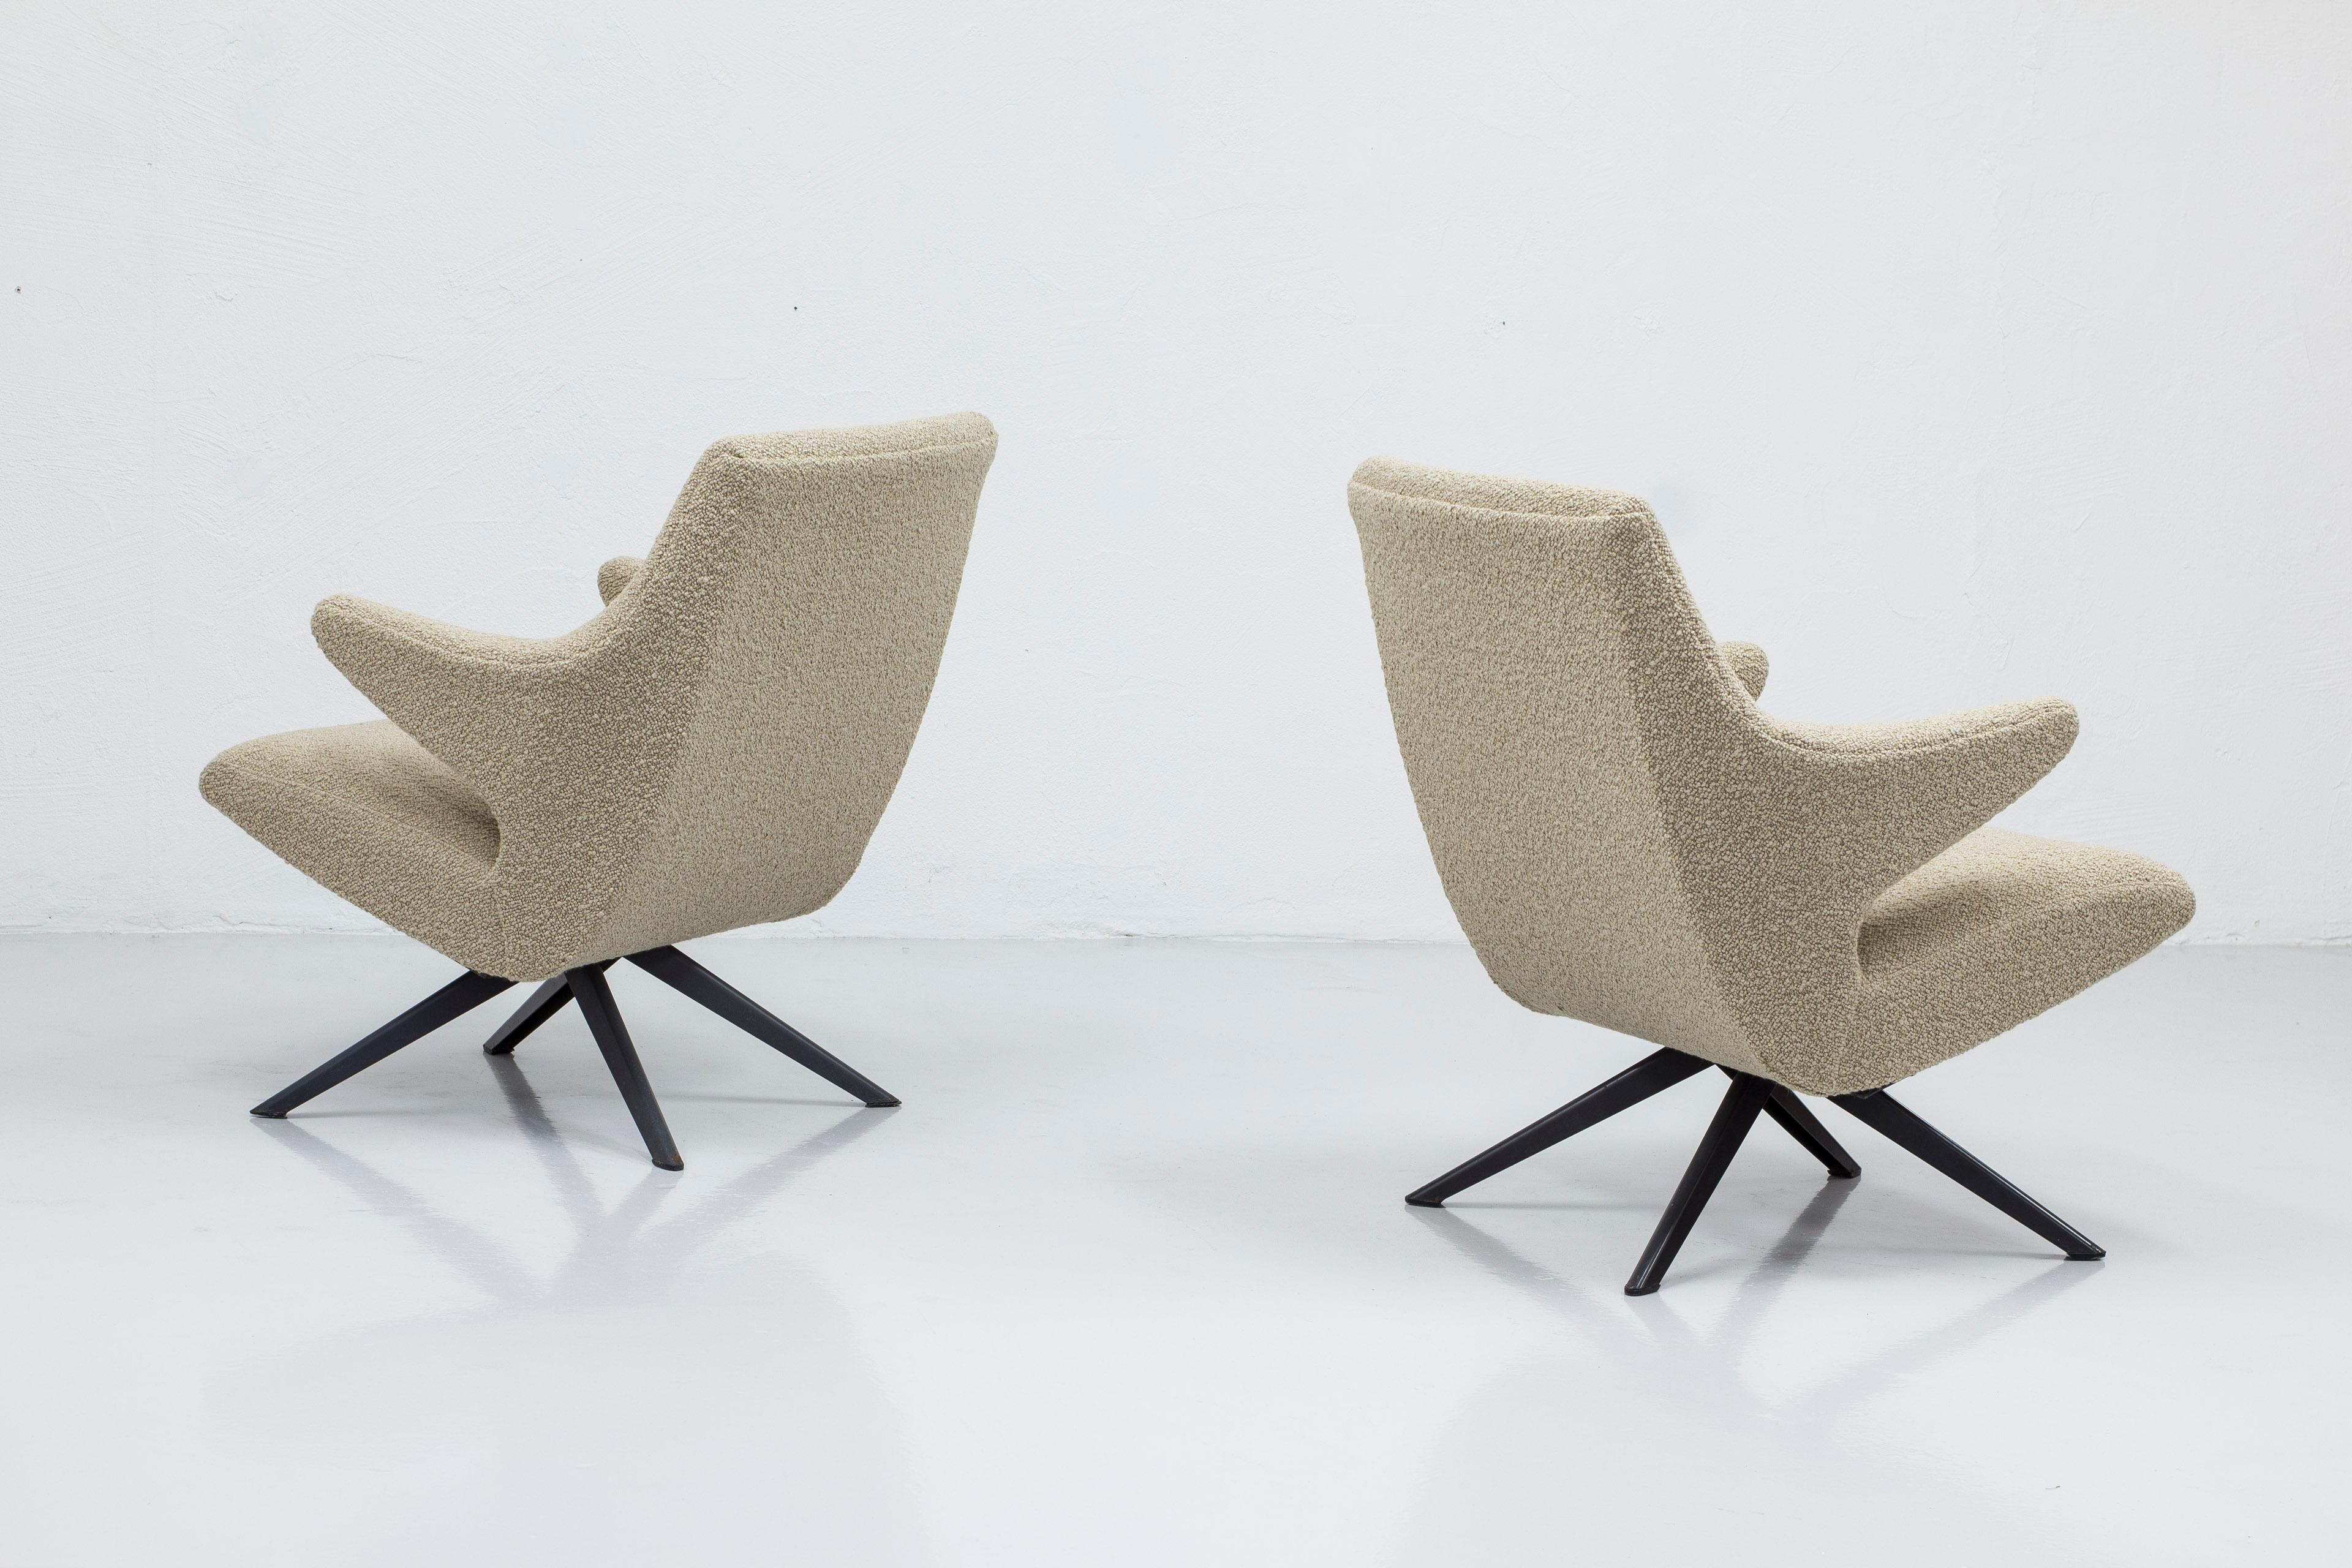 Pair of lounge chairs designed by Bengt Ruda by Nordiska Kompaniet, 1950 For Sale 1